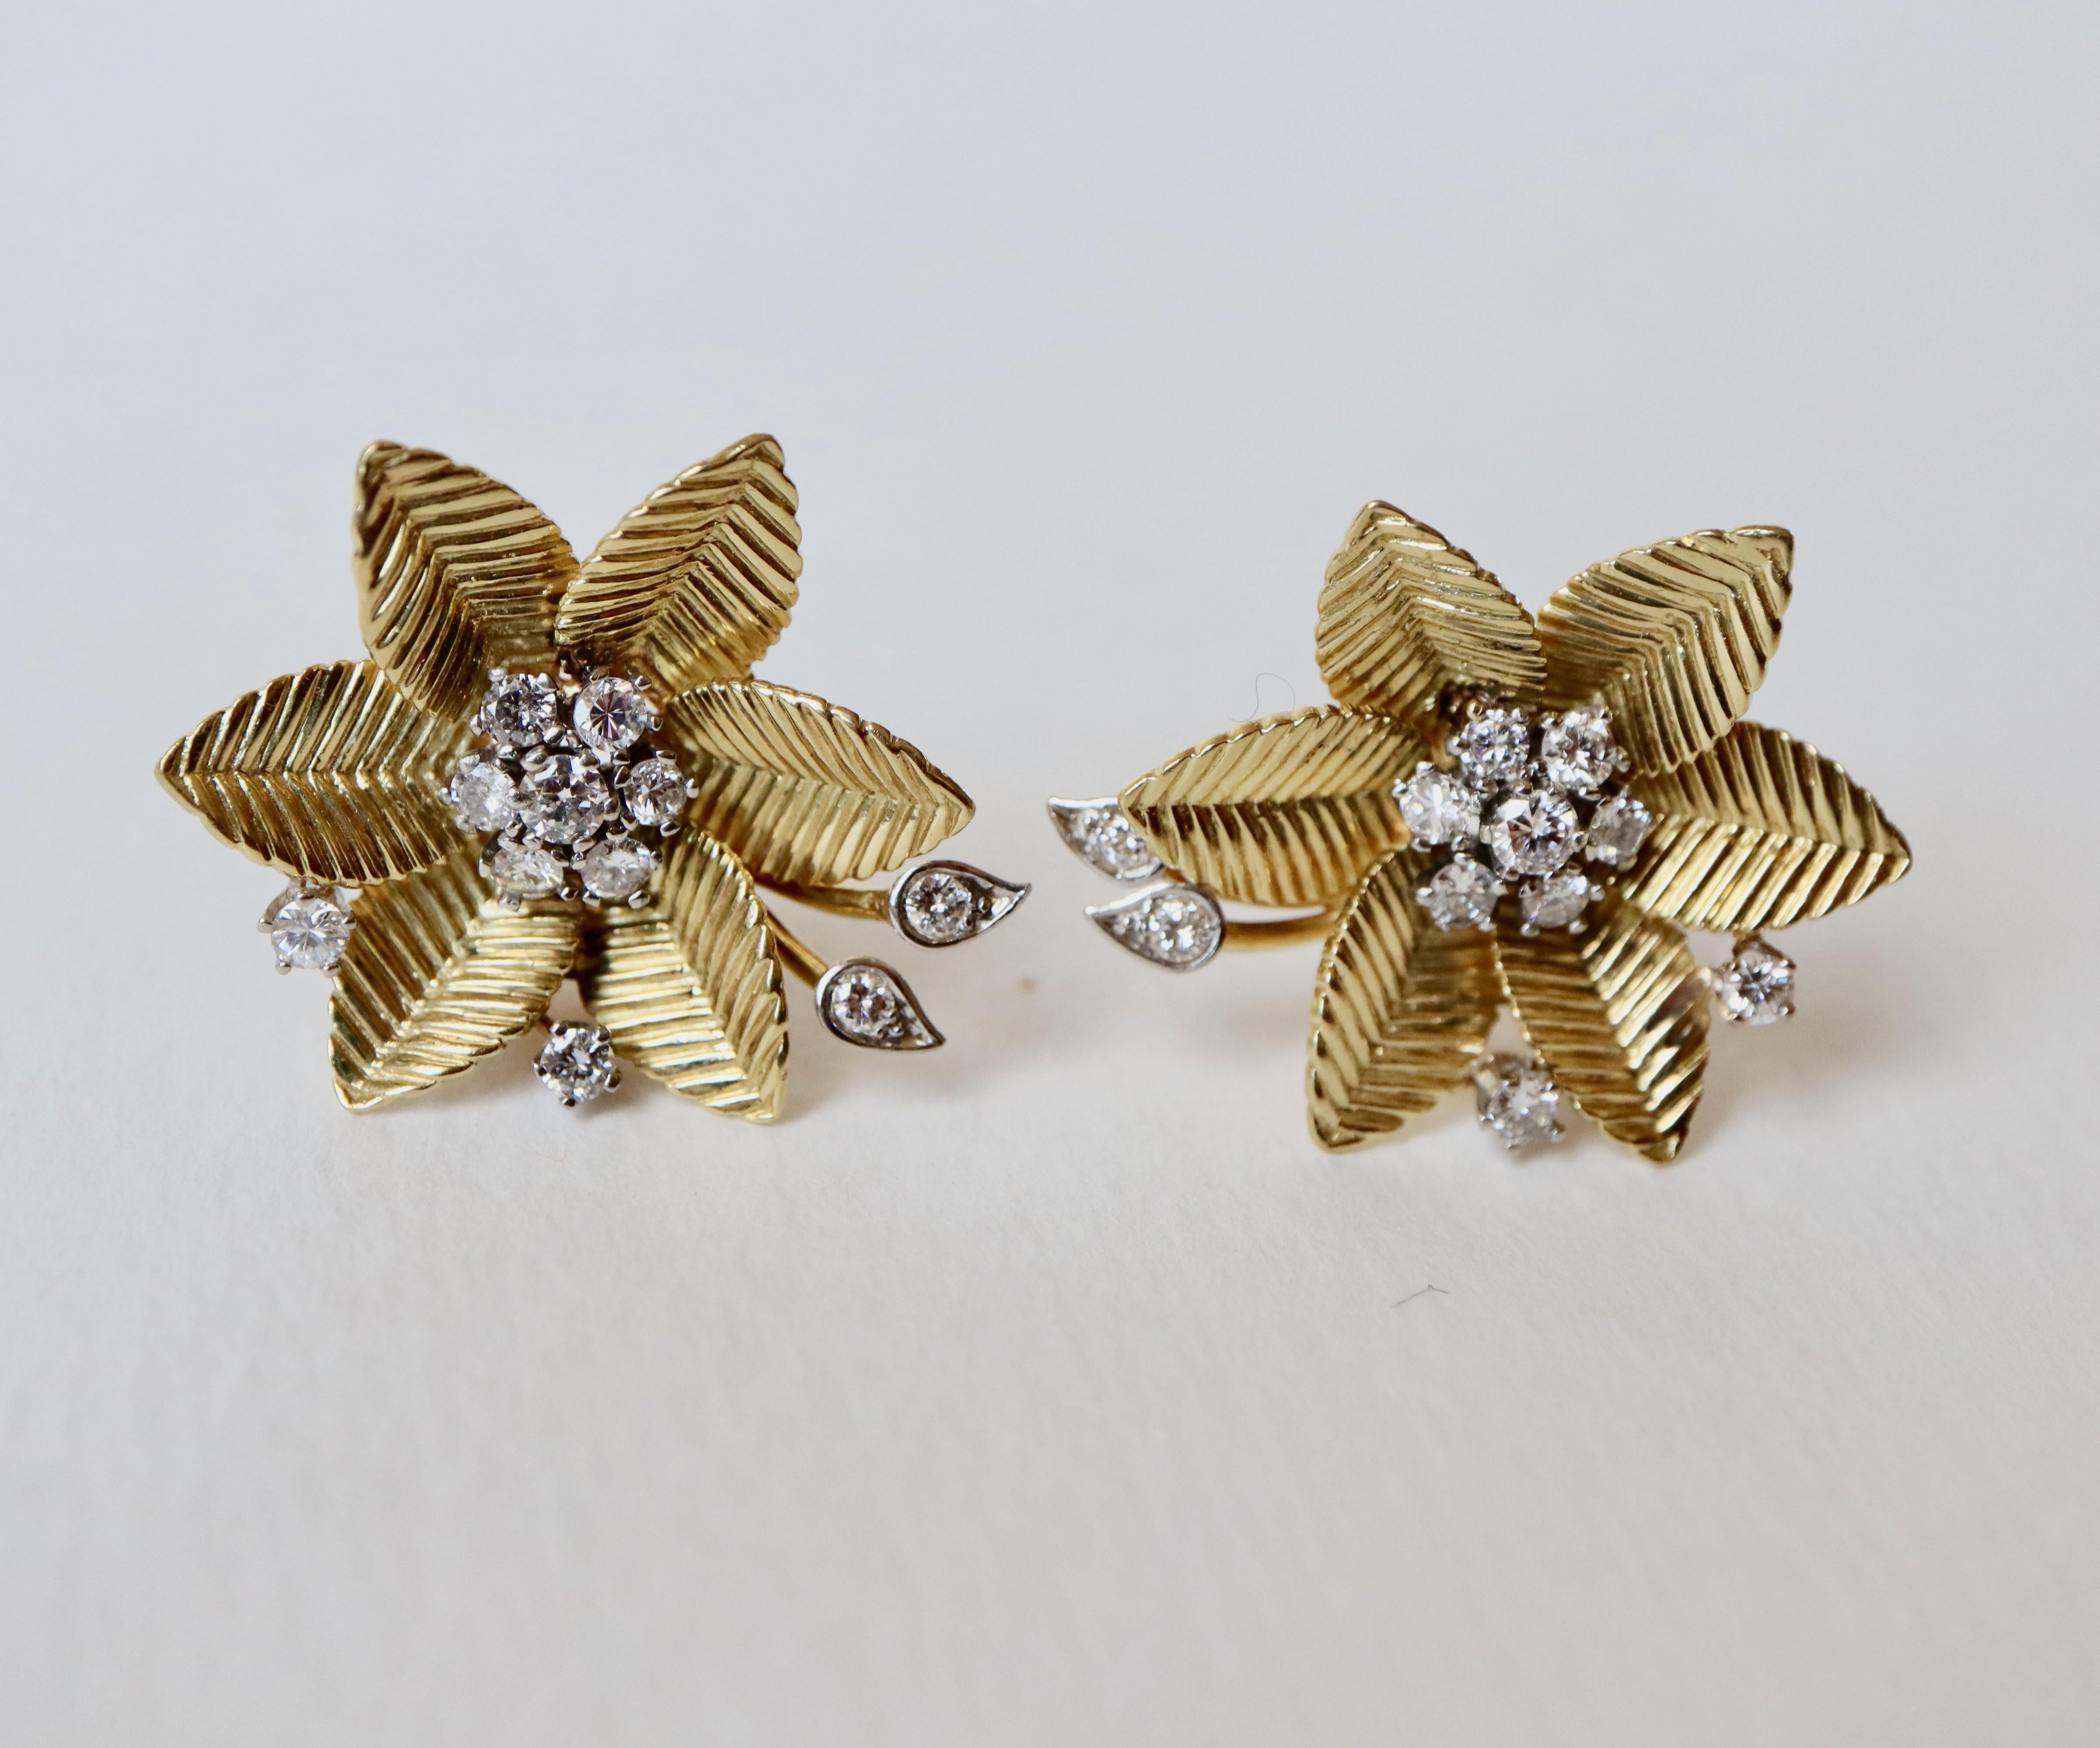 1950s clip-on earrings with a flower motif in 18 kt yellow gold. The flowers are composed of six gadrooned petals and the pistil is formed of 7 diamonds set in white gold and 4 stems finished with diamonds set in 18 Kt white gold. That is 11